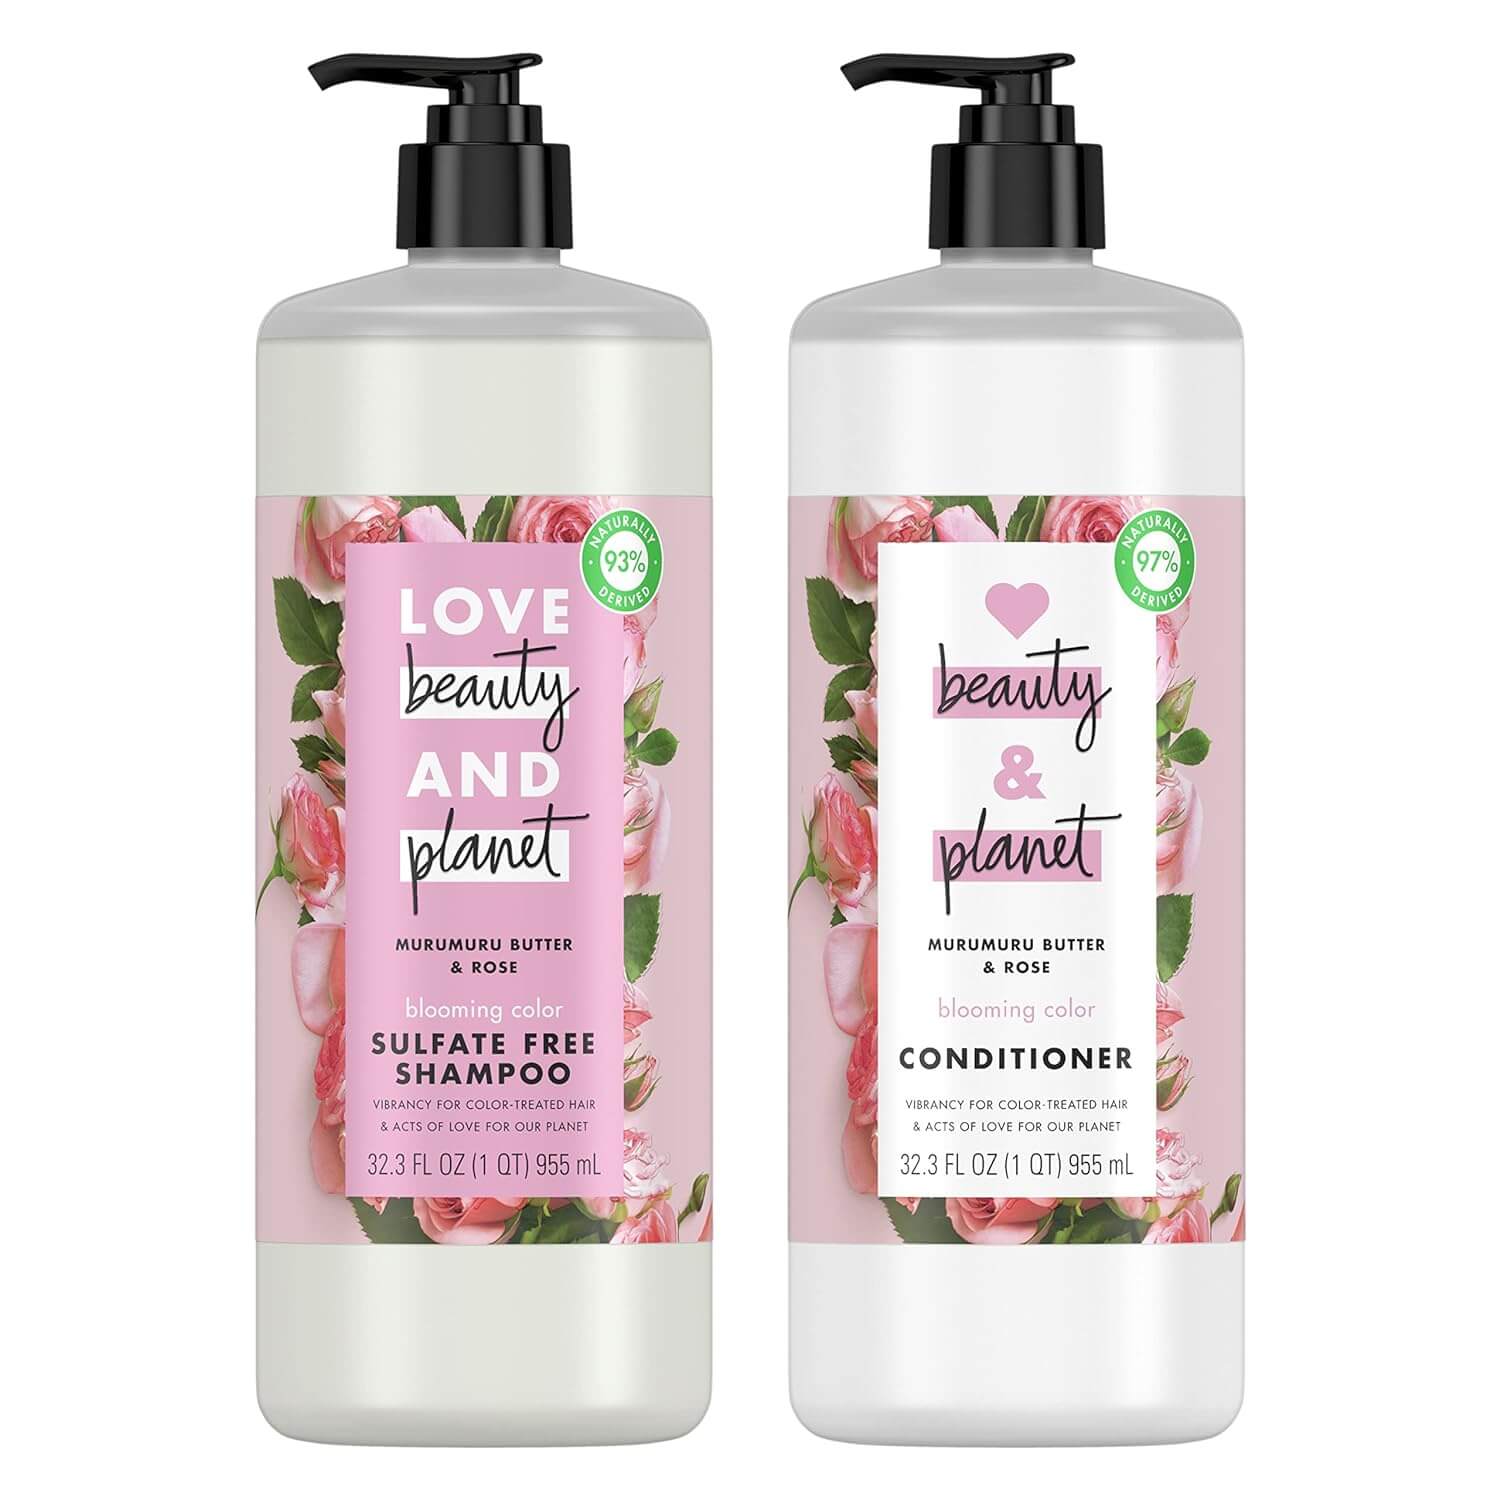 Love Beauty and Planet Blooming Color Sulfate-Free Shampoo and Conditioner